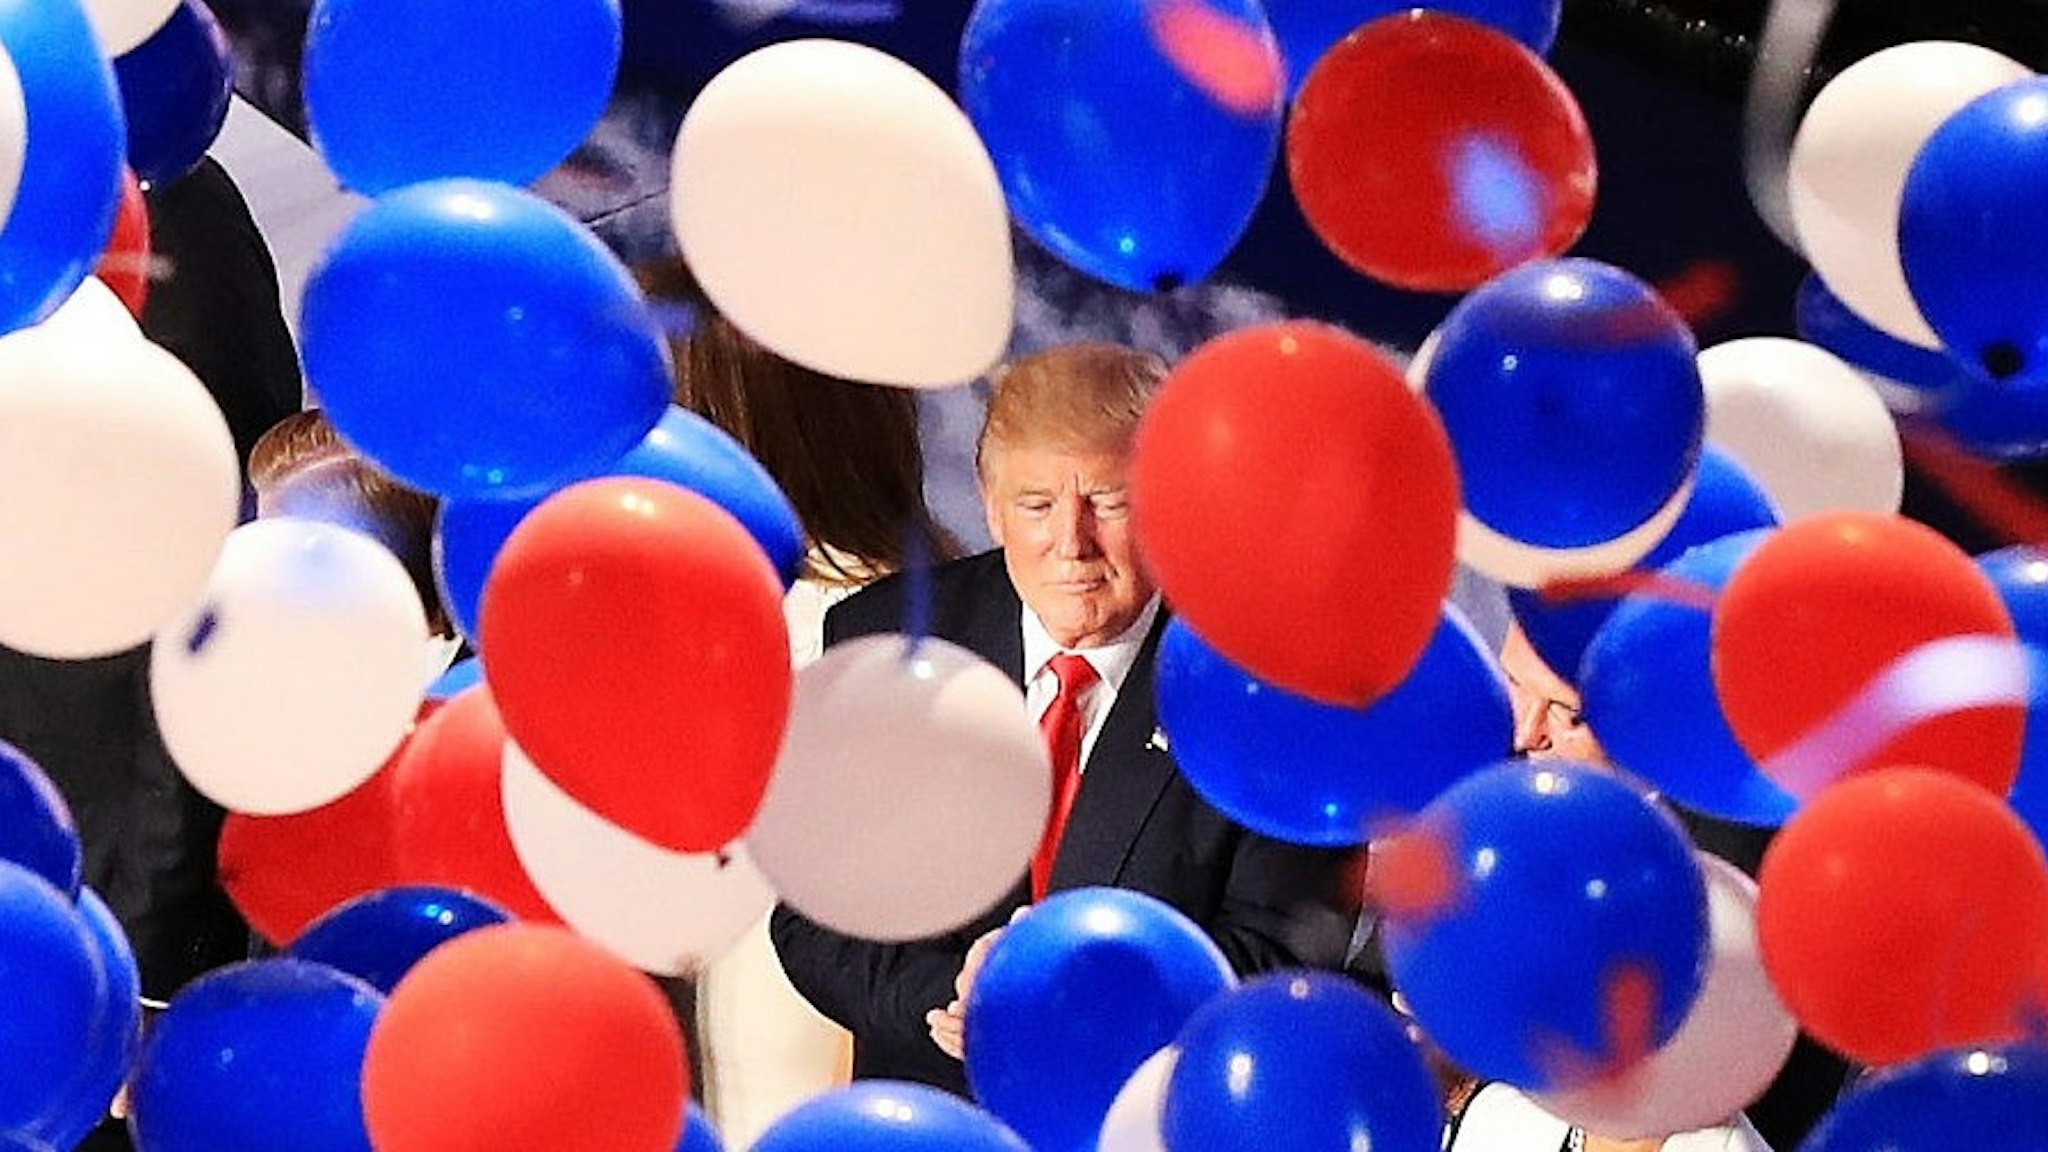 CLEVELAND, OH - JULY 21: Republican presidential candidate Donald Trump and his family acknowledge the crowd as balloons fall on the fourth day of the Republican National Convention on July 21, 2016 at the Quicken Loans Arena in Cleveland, Ohio. Republican presidential candidate Donald Trump received the number of votes needed to secure the party's nomination. An estimated 50,000 people are expected in Cleveland, including hundreds of protesters and members of the media. The four-day Republican National Convention kicked off on July 18. (Photo by